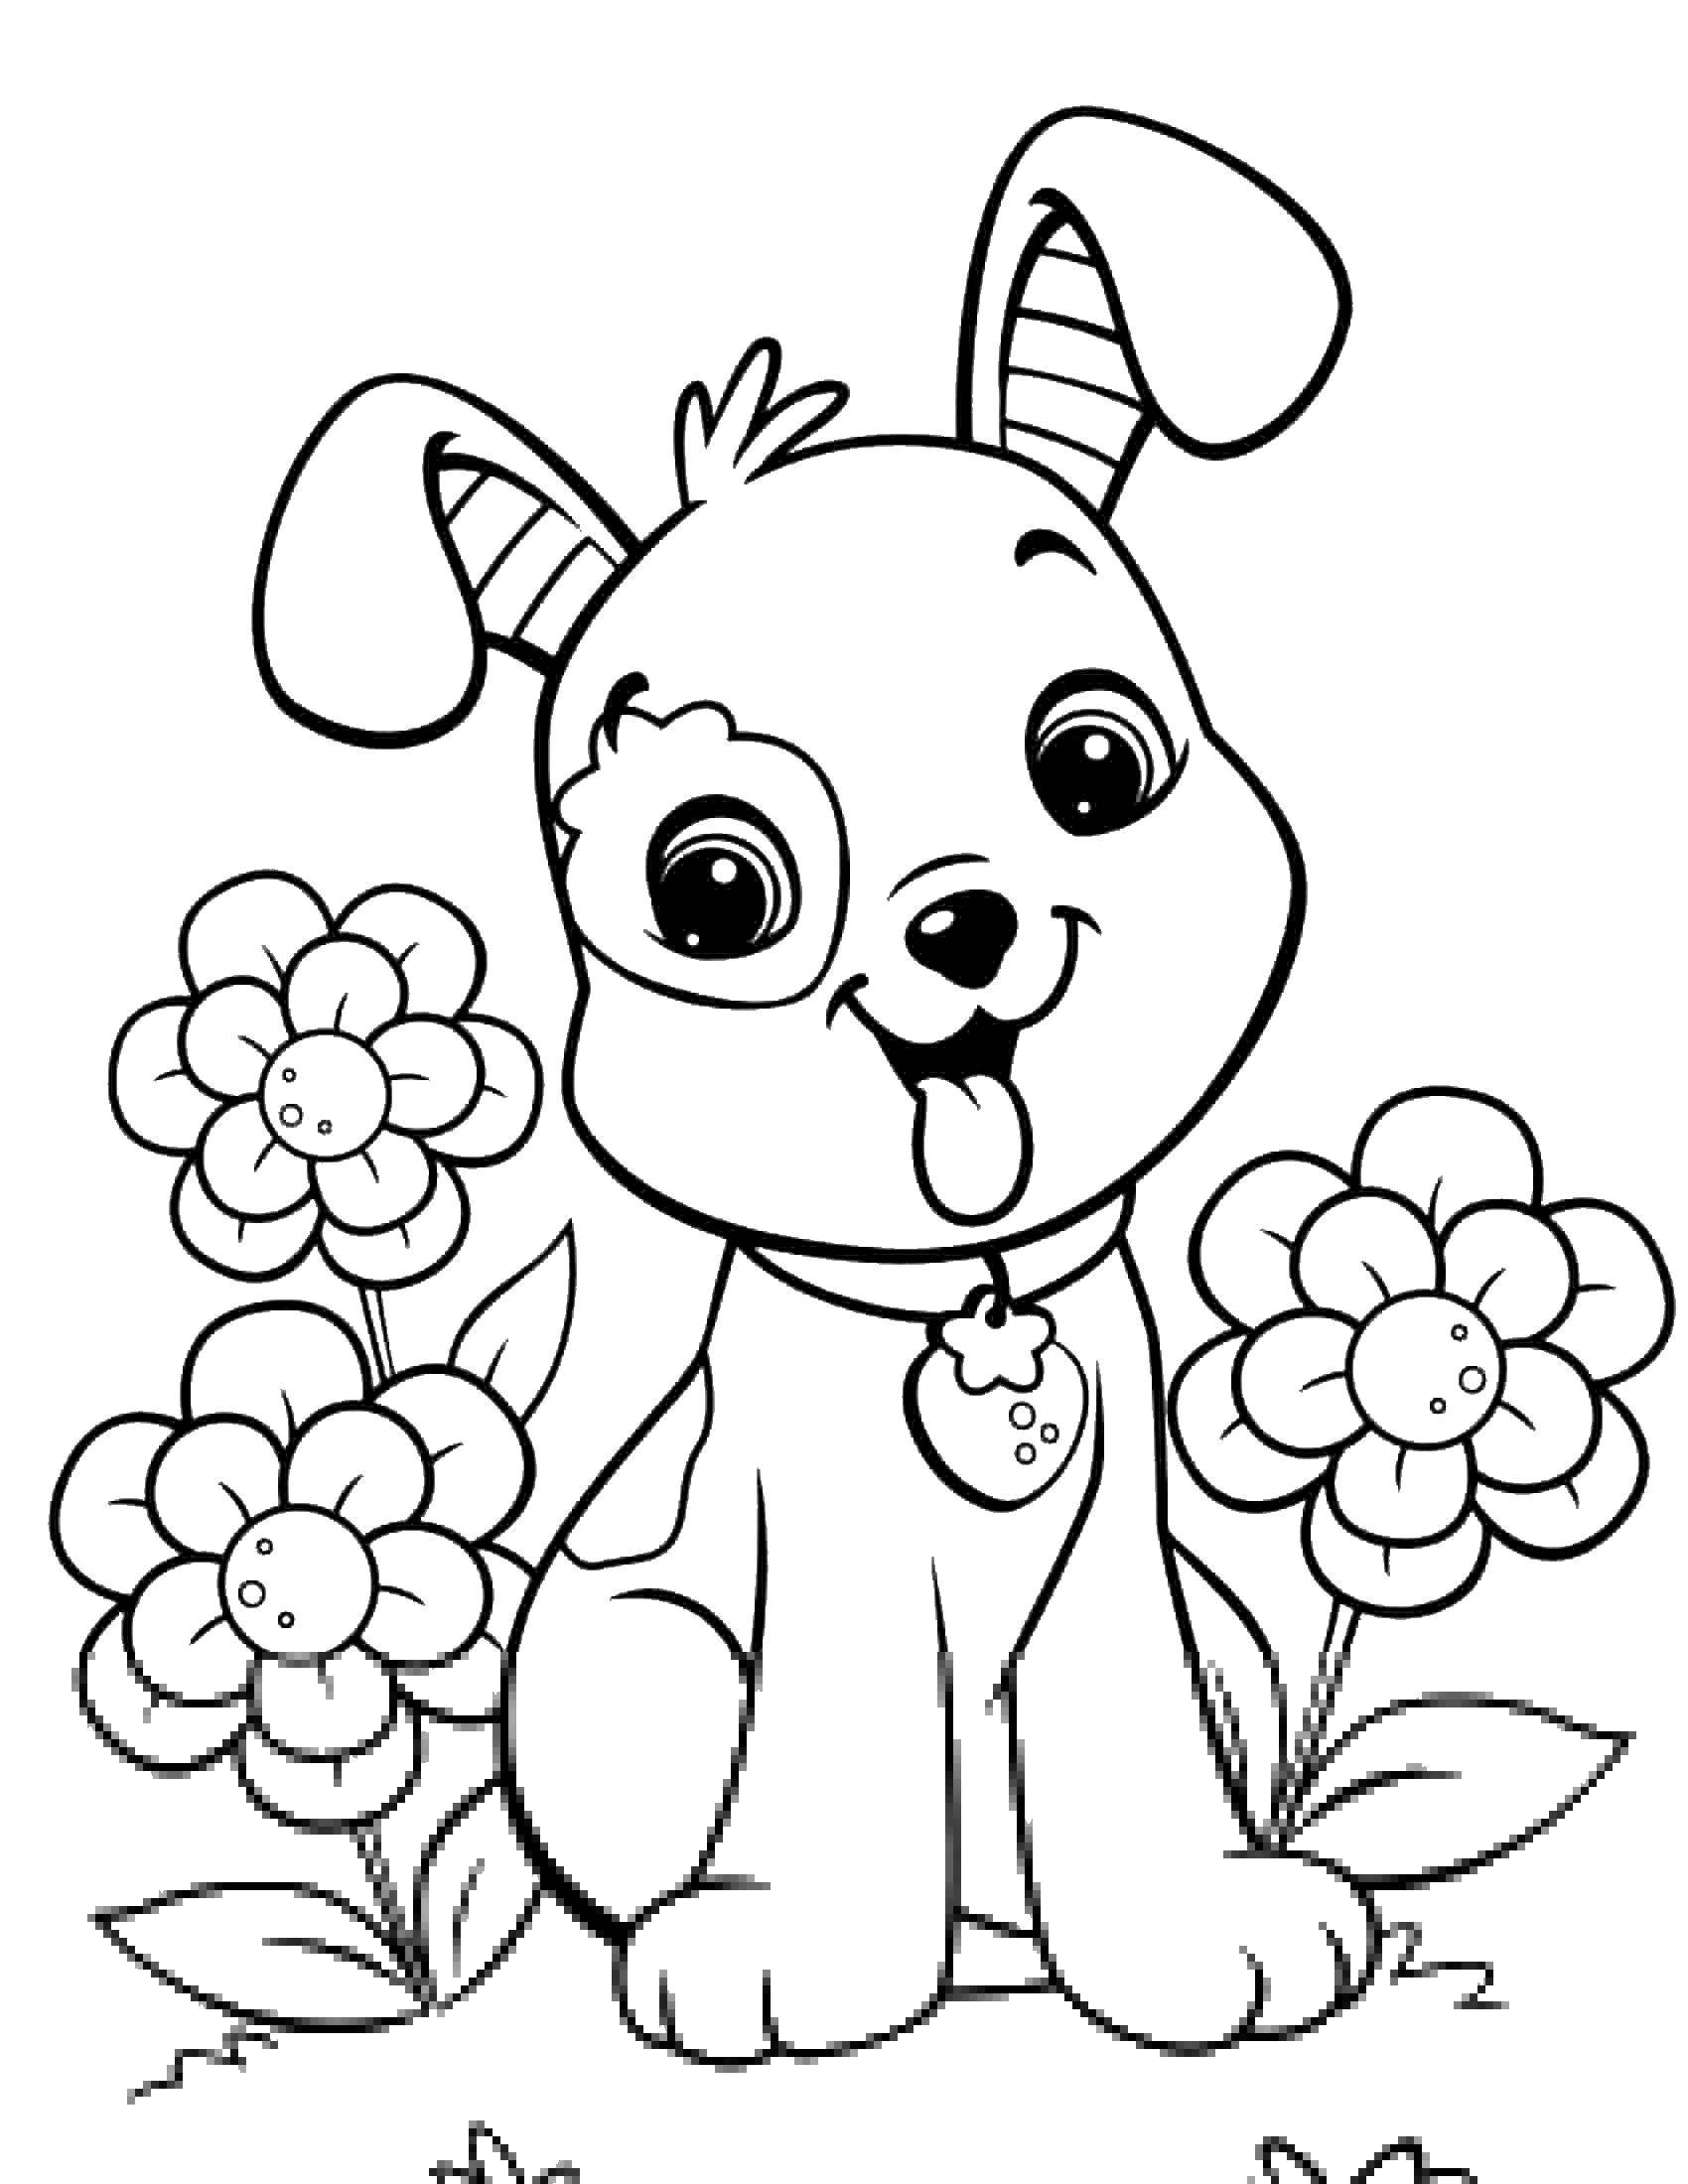 Coloring Doggy with flowers. Category Pets allowed. Tags:  animals, dogs, flowers.